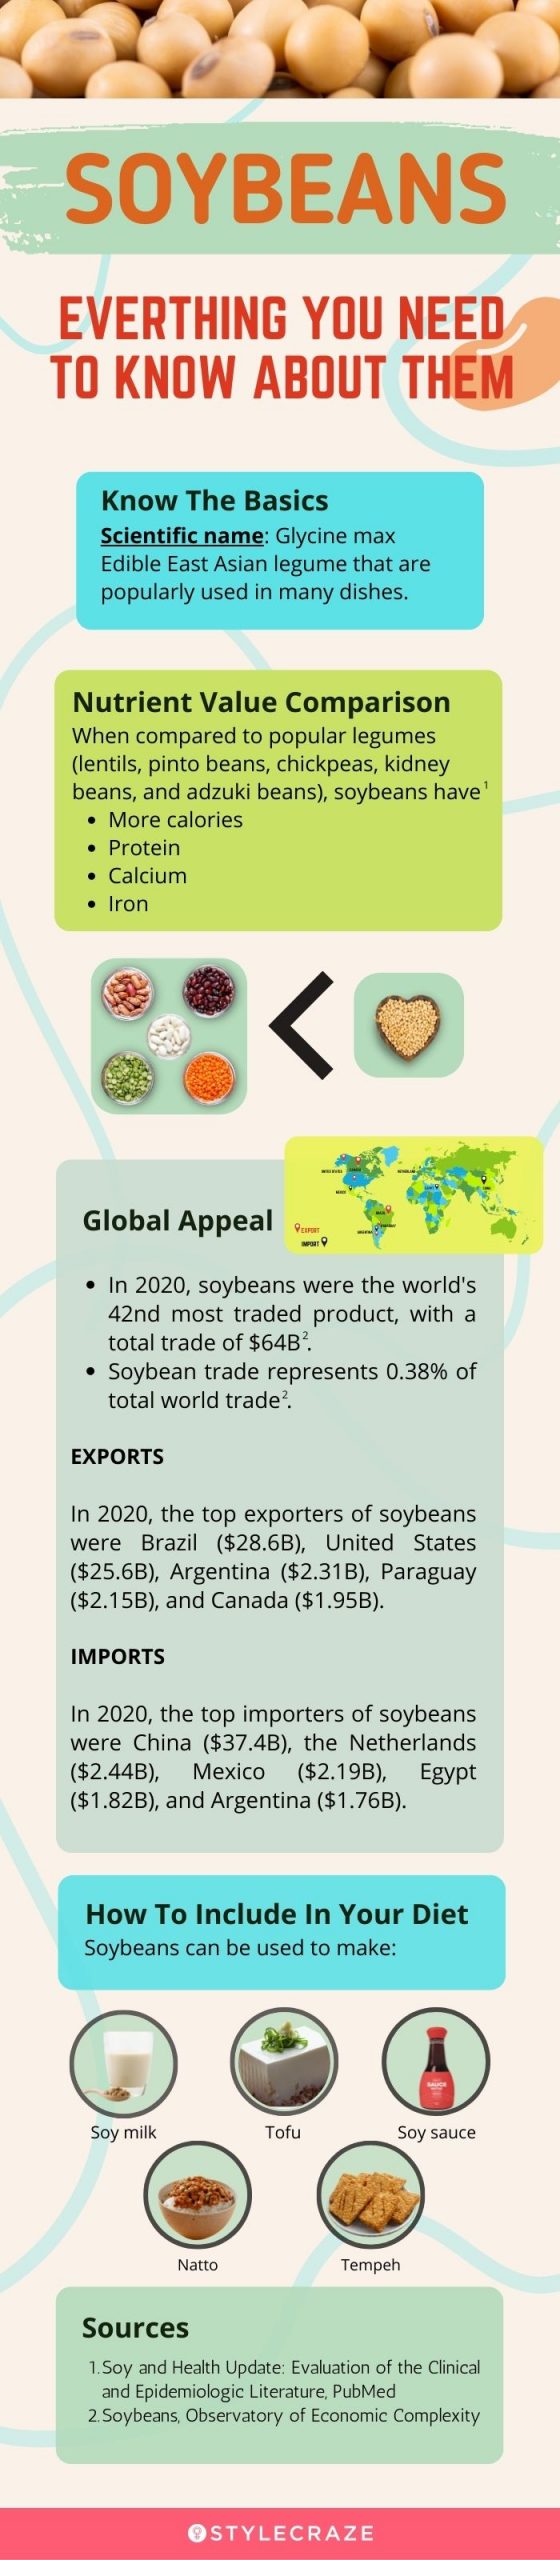 everything you need to know about soybeans [infographic]